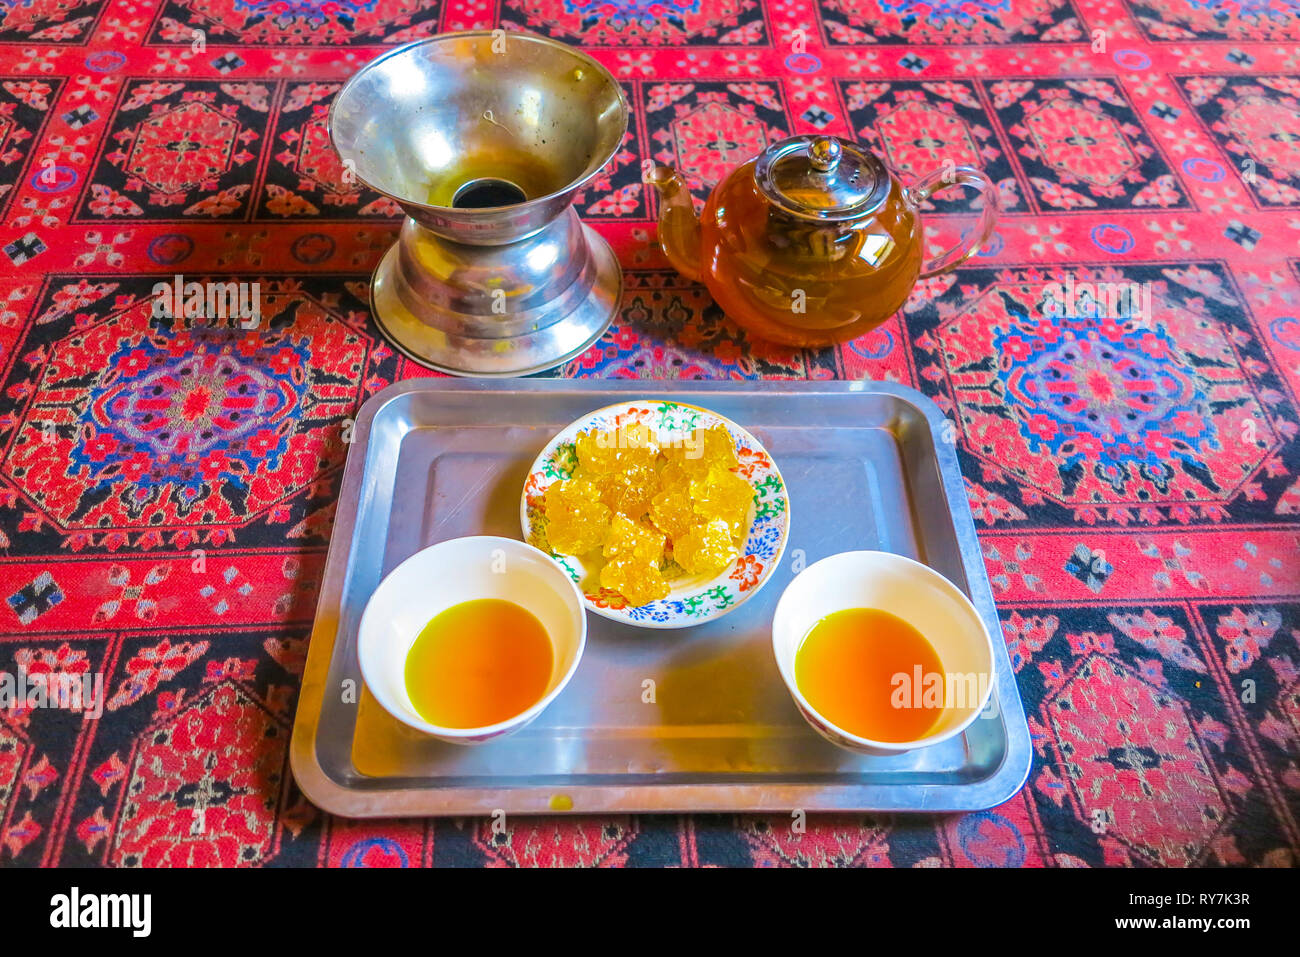 Kashgar Tea House Two Cups Filled with Yellow Colored Tea on Carpet Stock Photo